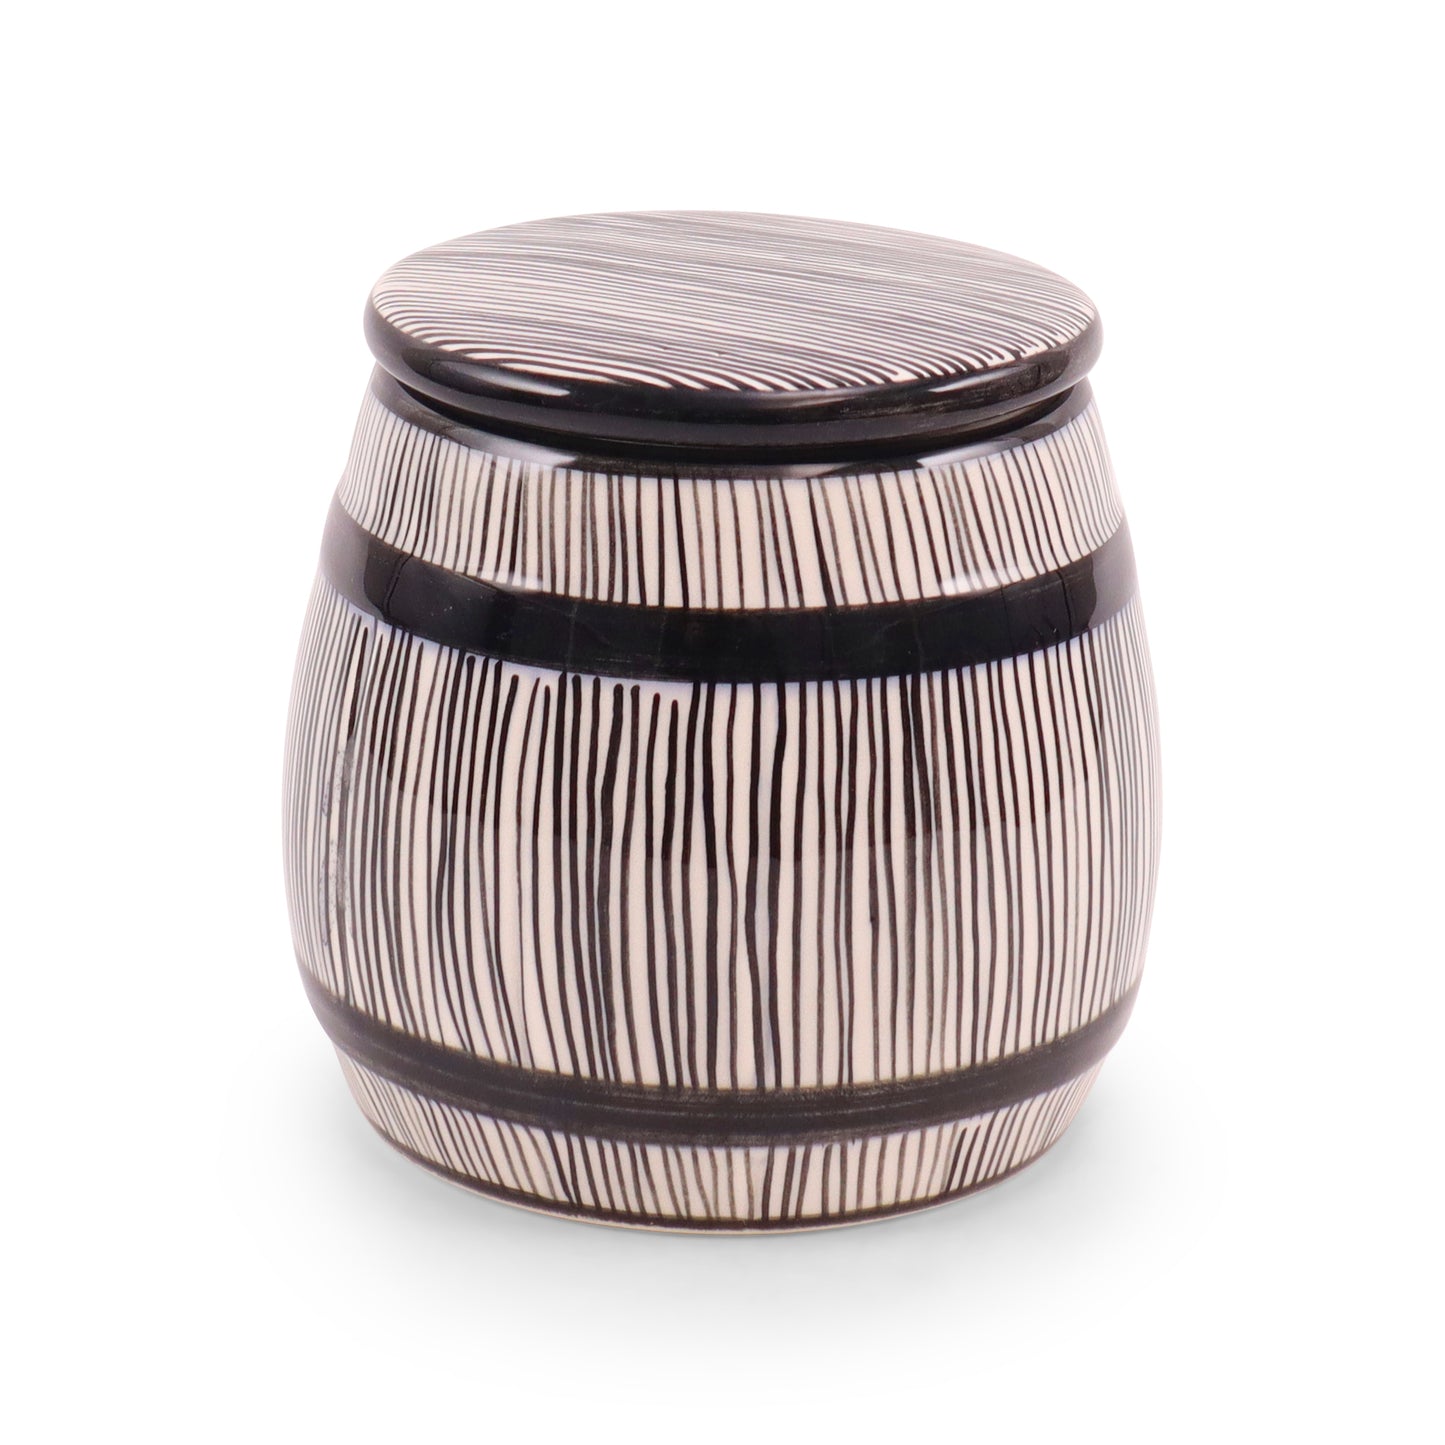 4"x5" Container with Lid. Pattern: Pinstripe